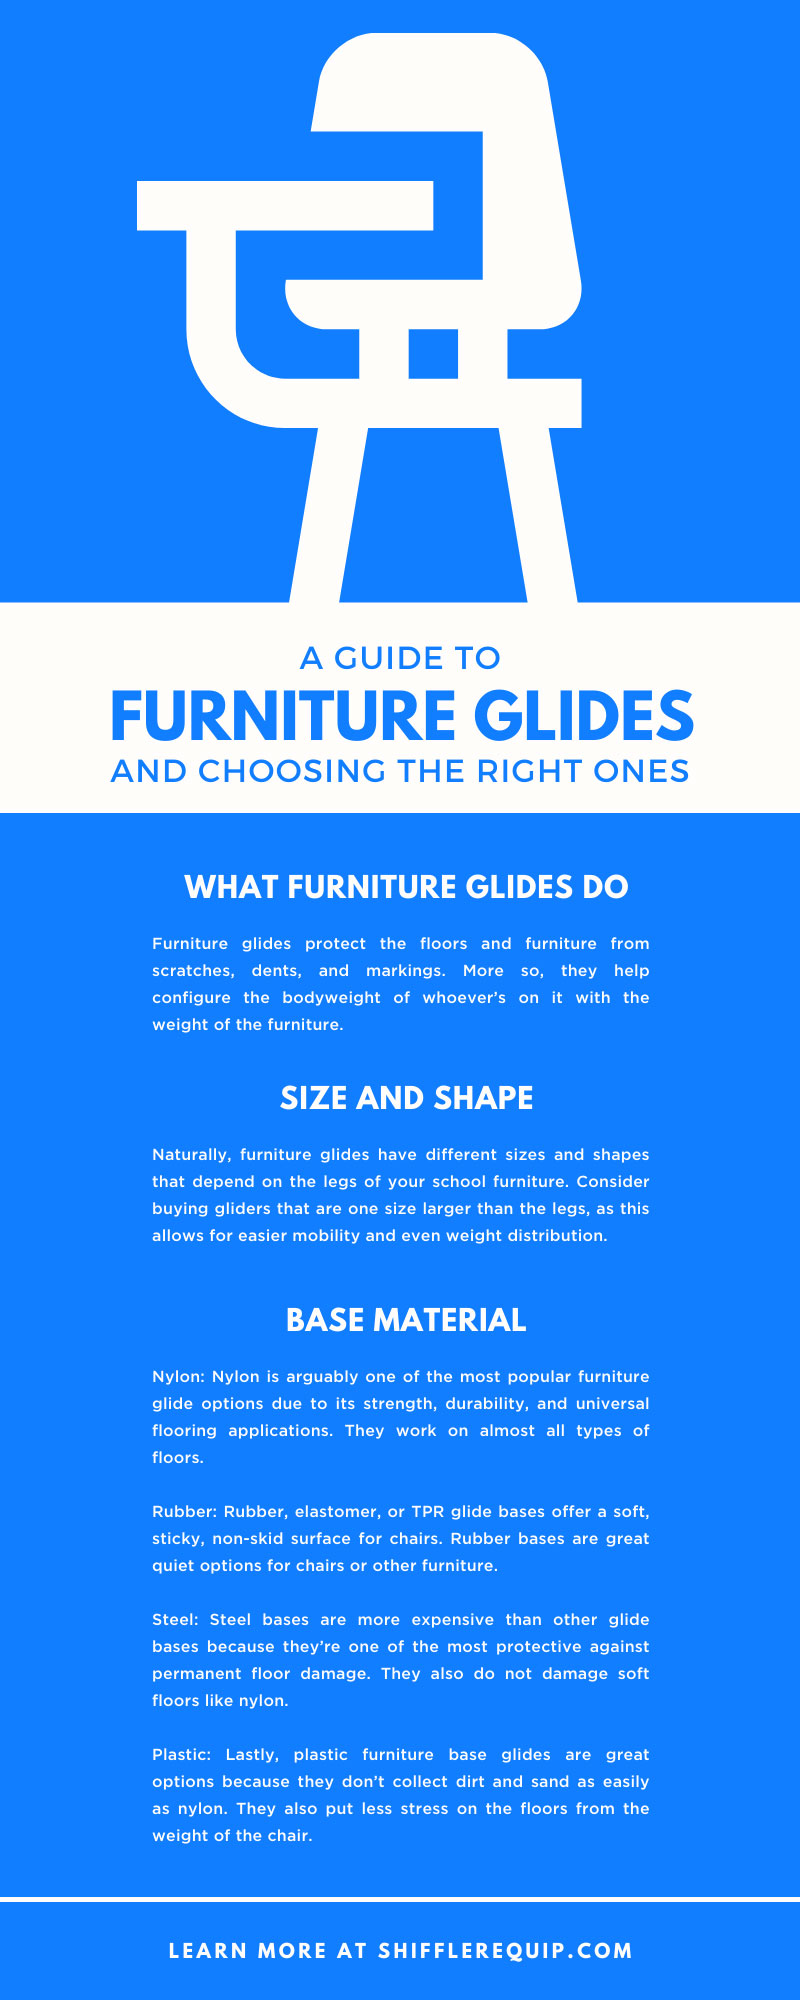 A Guide to Furniture Glides and Choosing the Right Ones